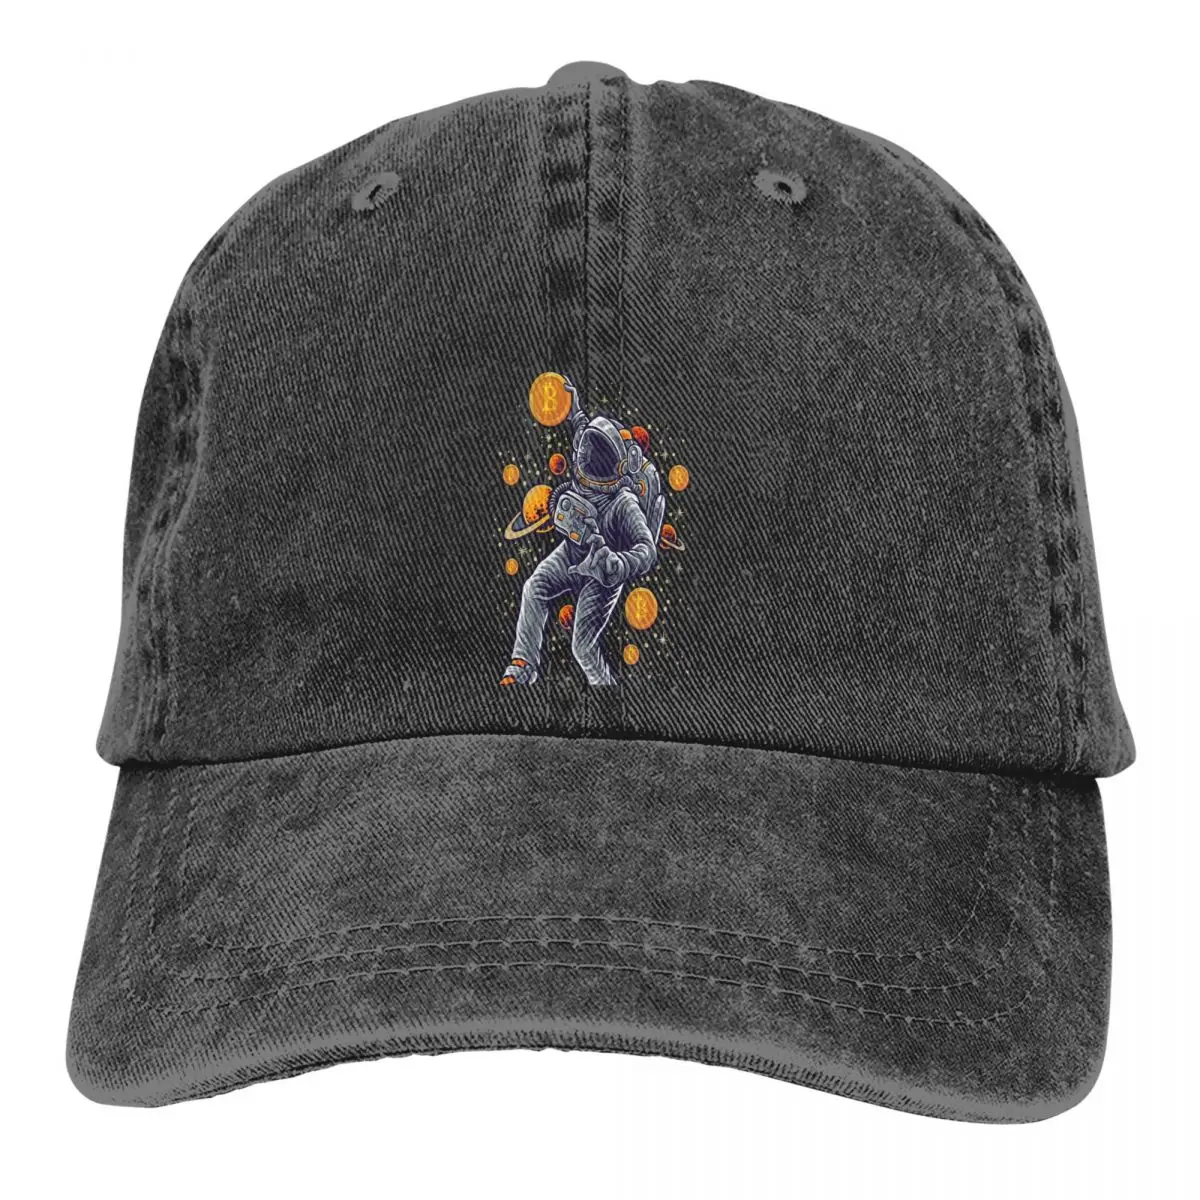 

BTC Crypto Basketball In Space Baseball Caps Peaked Cap Bitcoin Cryptocurrency Miners Meme Sun Shade Hats for Men